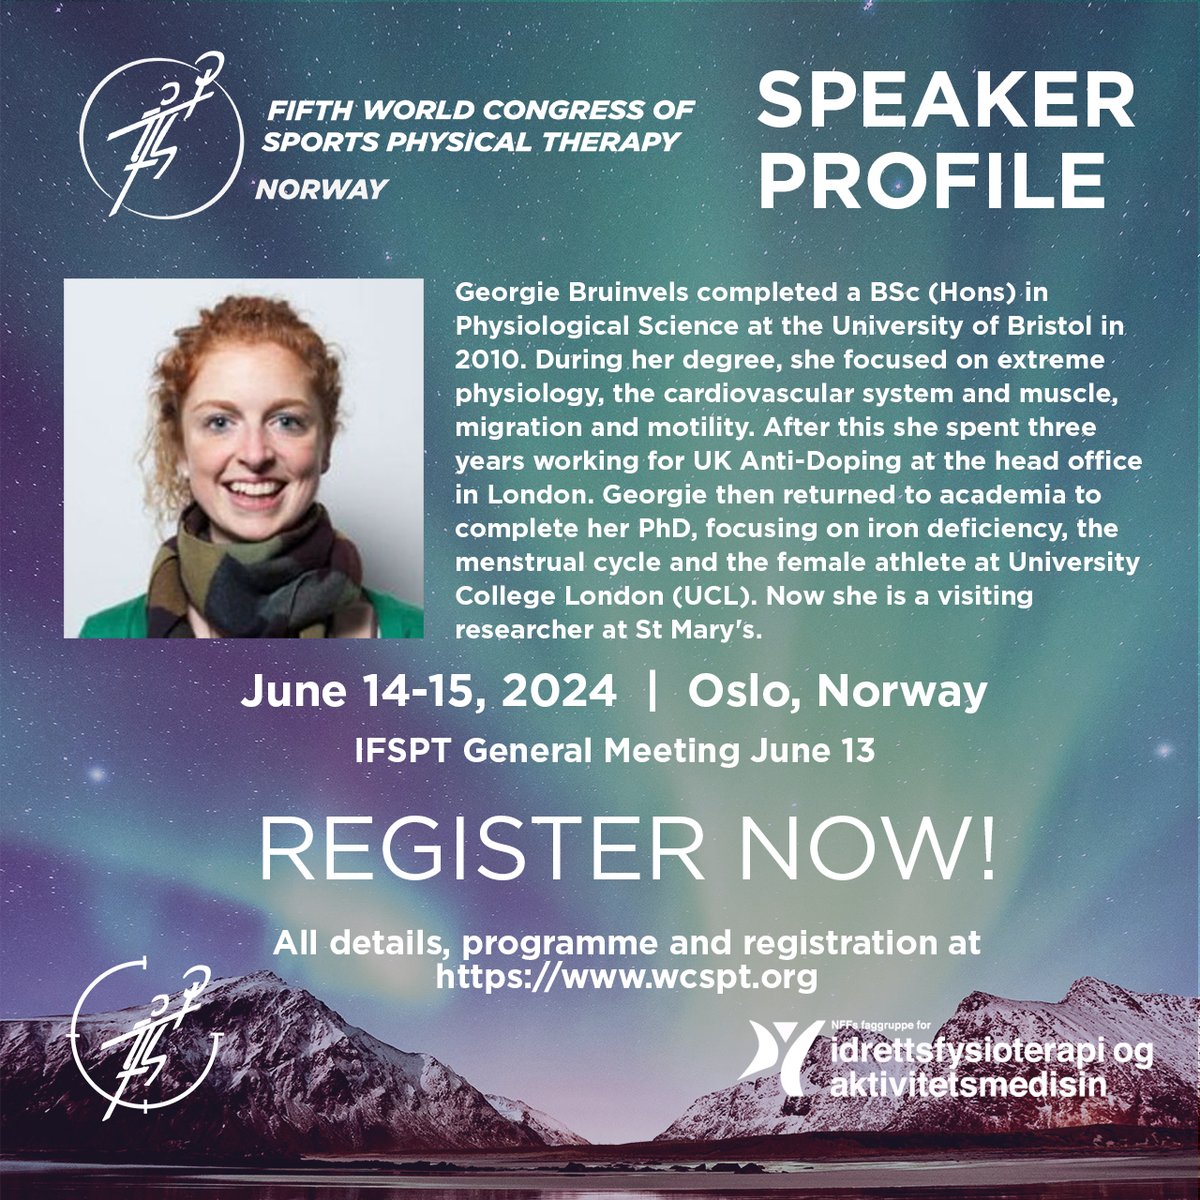 Join speaker Georgie Bruinvels at the Fifth World Congress of Sports Physical Therapy! Register now: wcspt.org